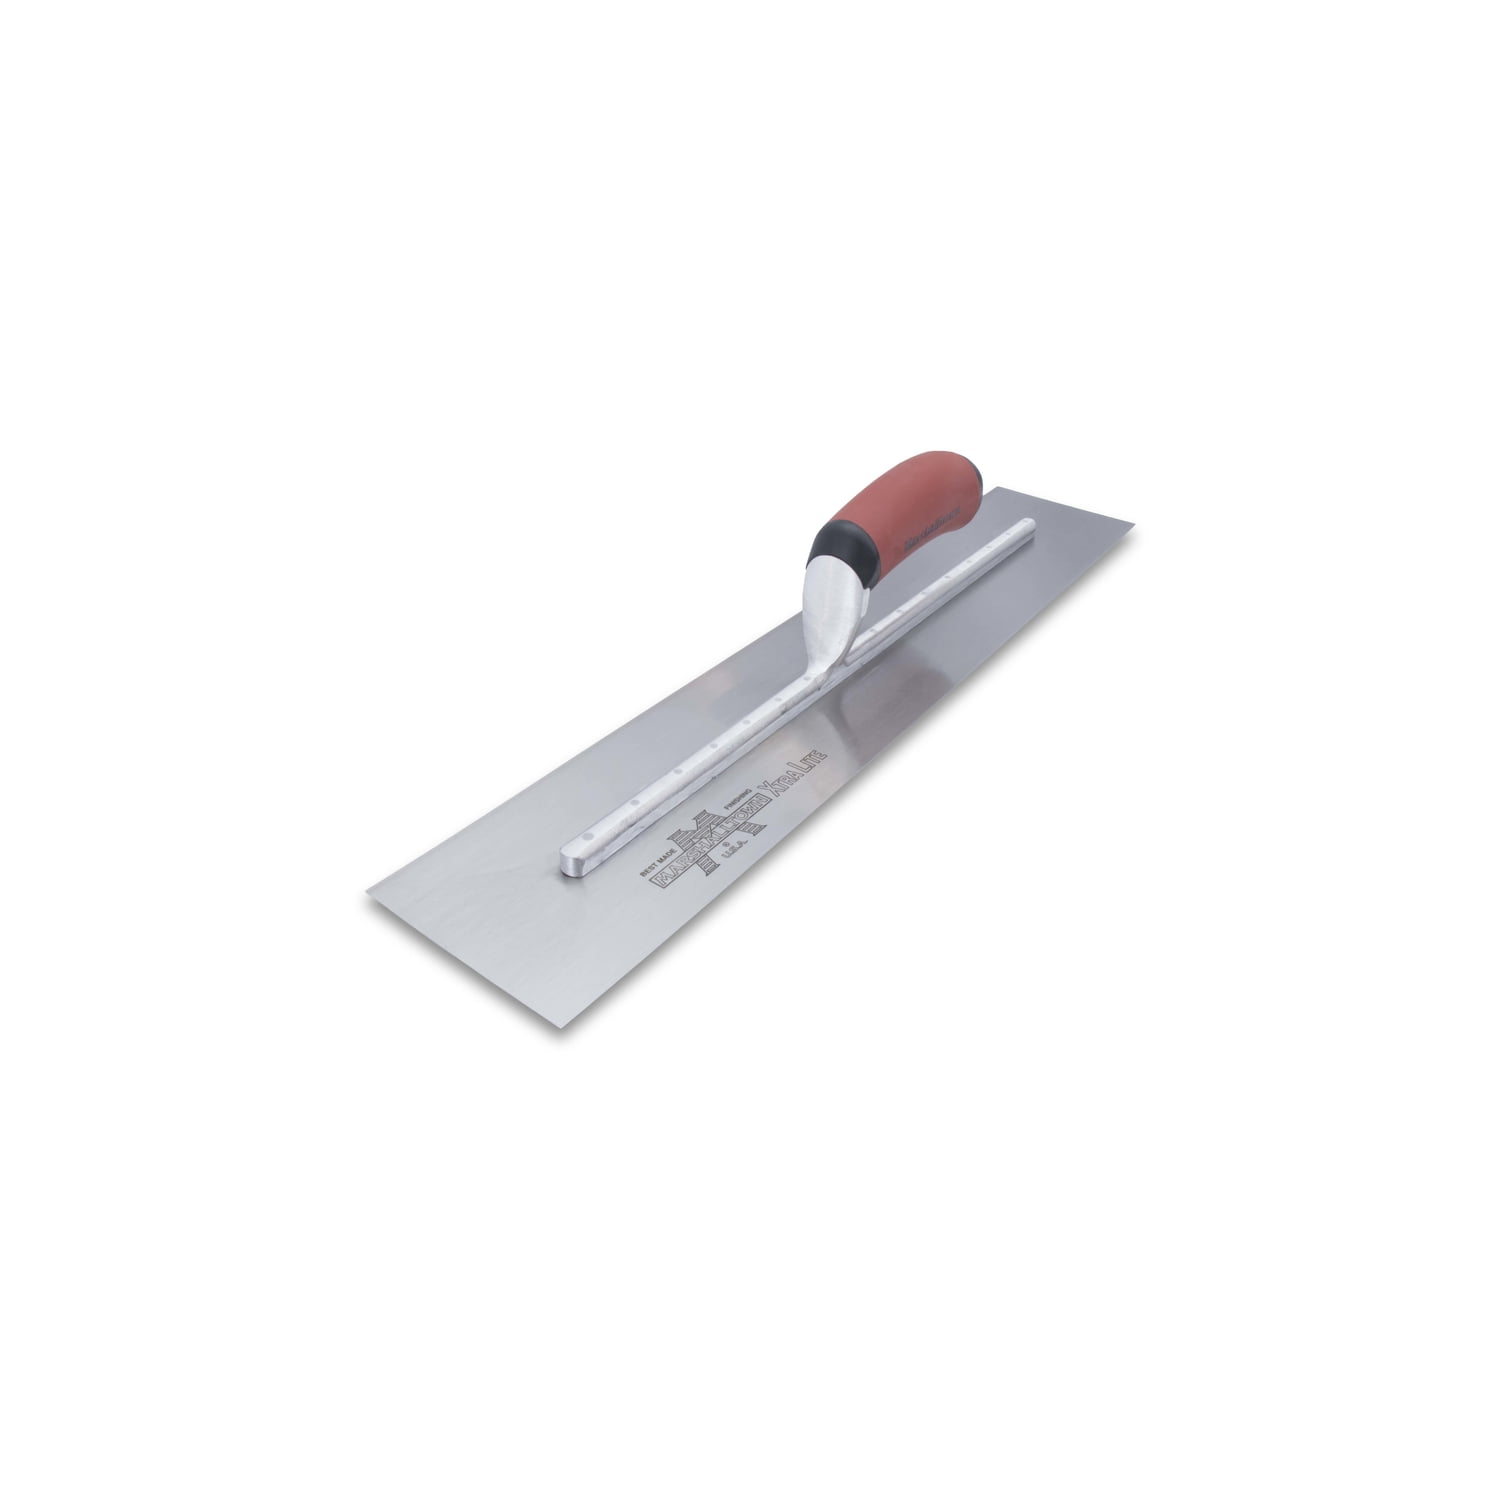 Marshalltown Finishing Trowel 22X4 Inch Curved Resilient Durasoft Handle Steel 